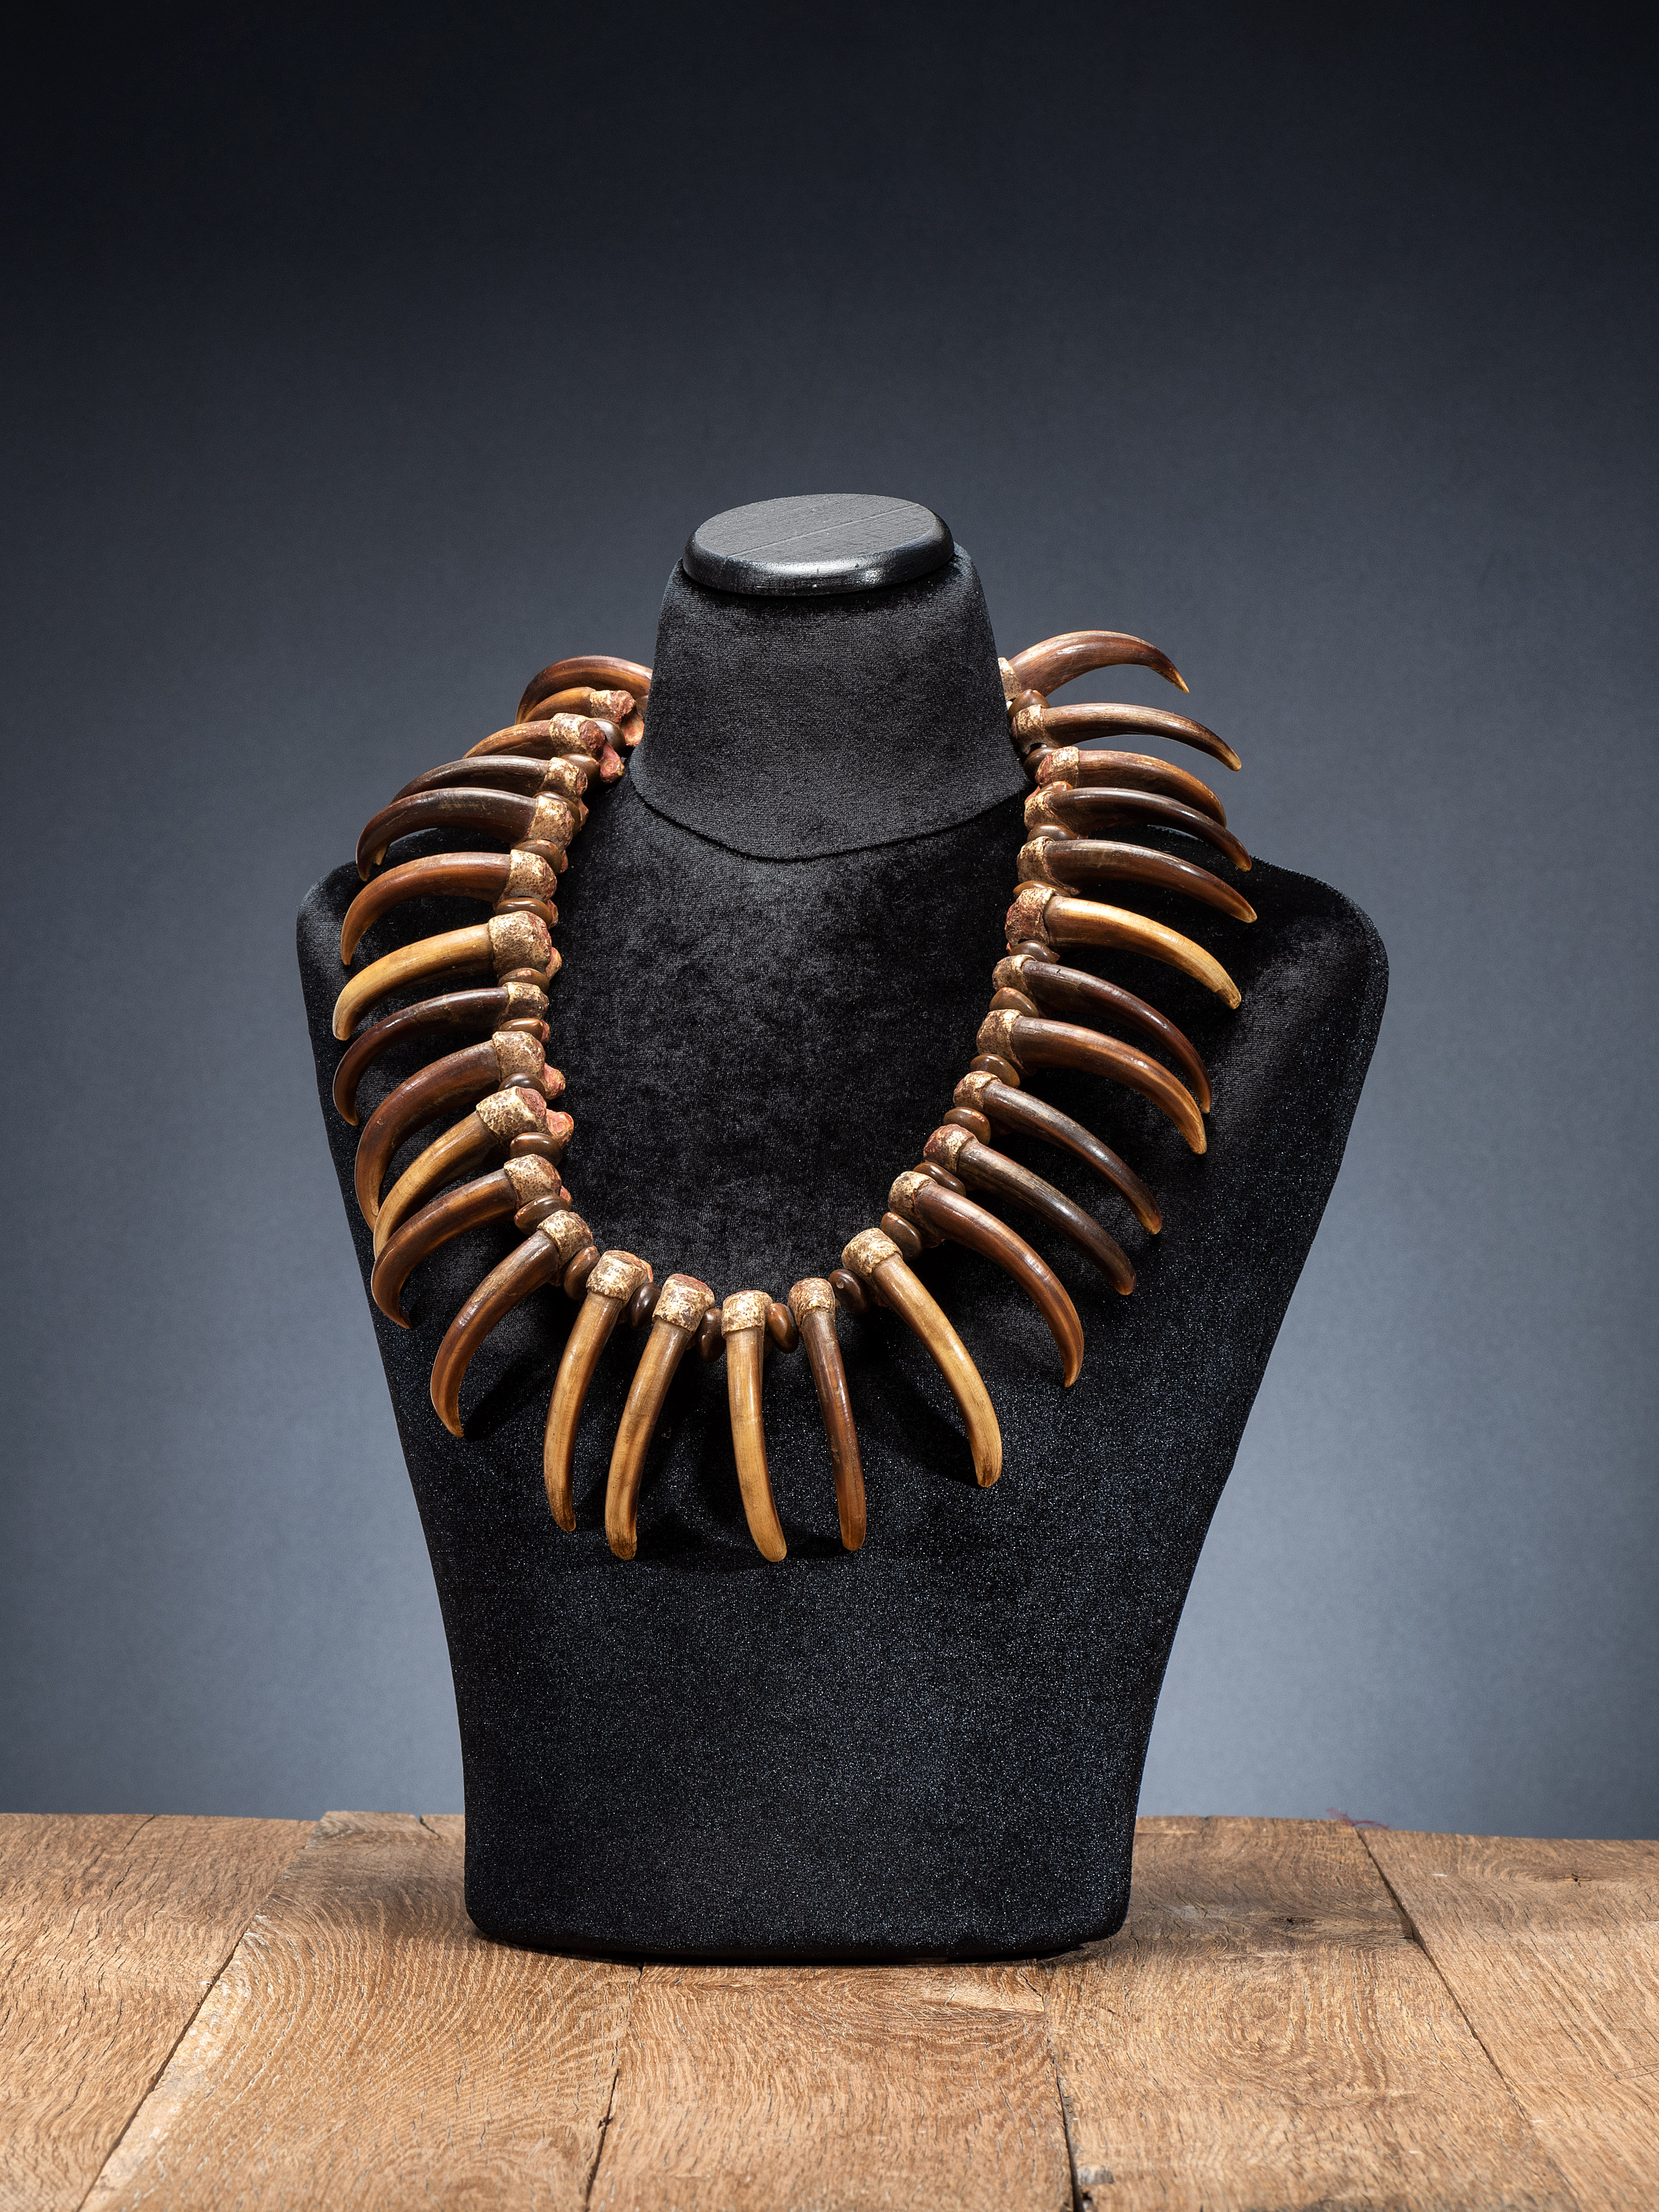 Sioux Grizzly Bear claw necklace, $75,000